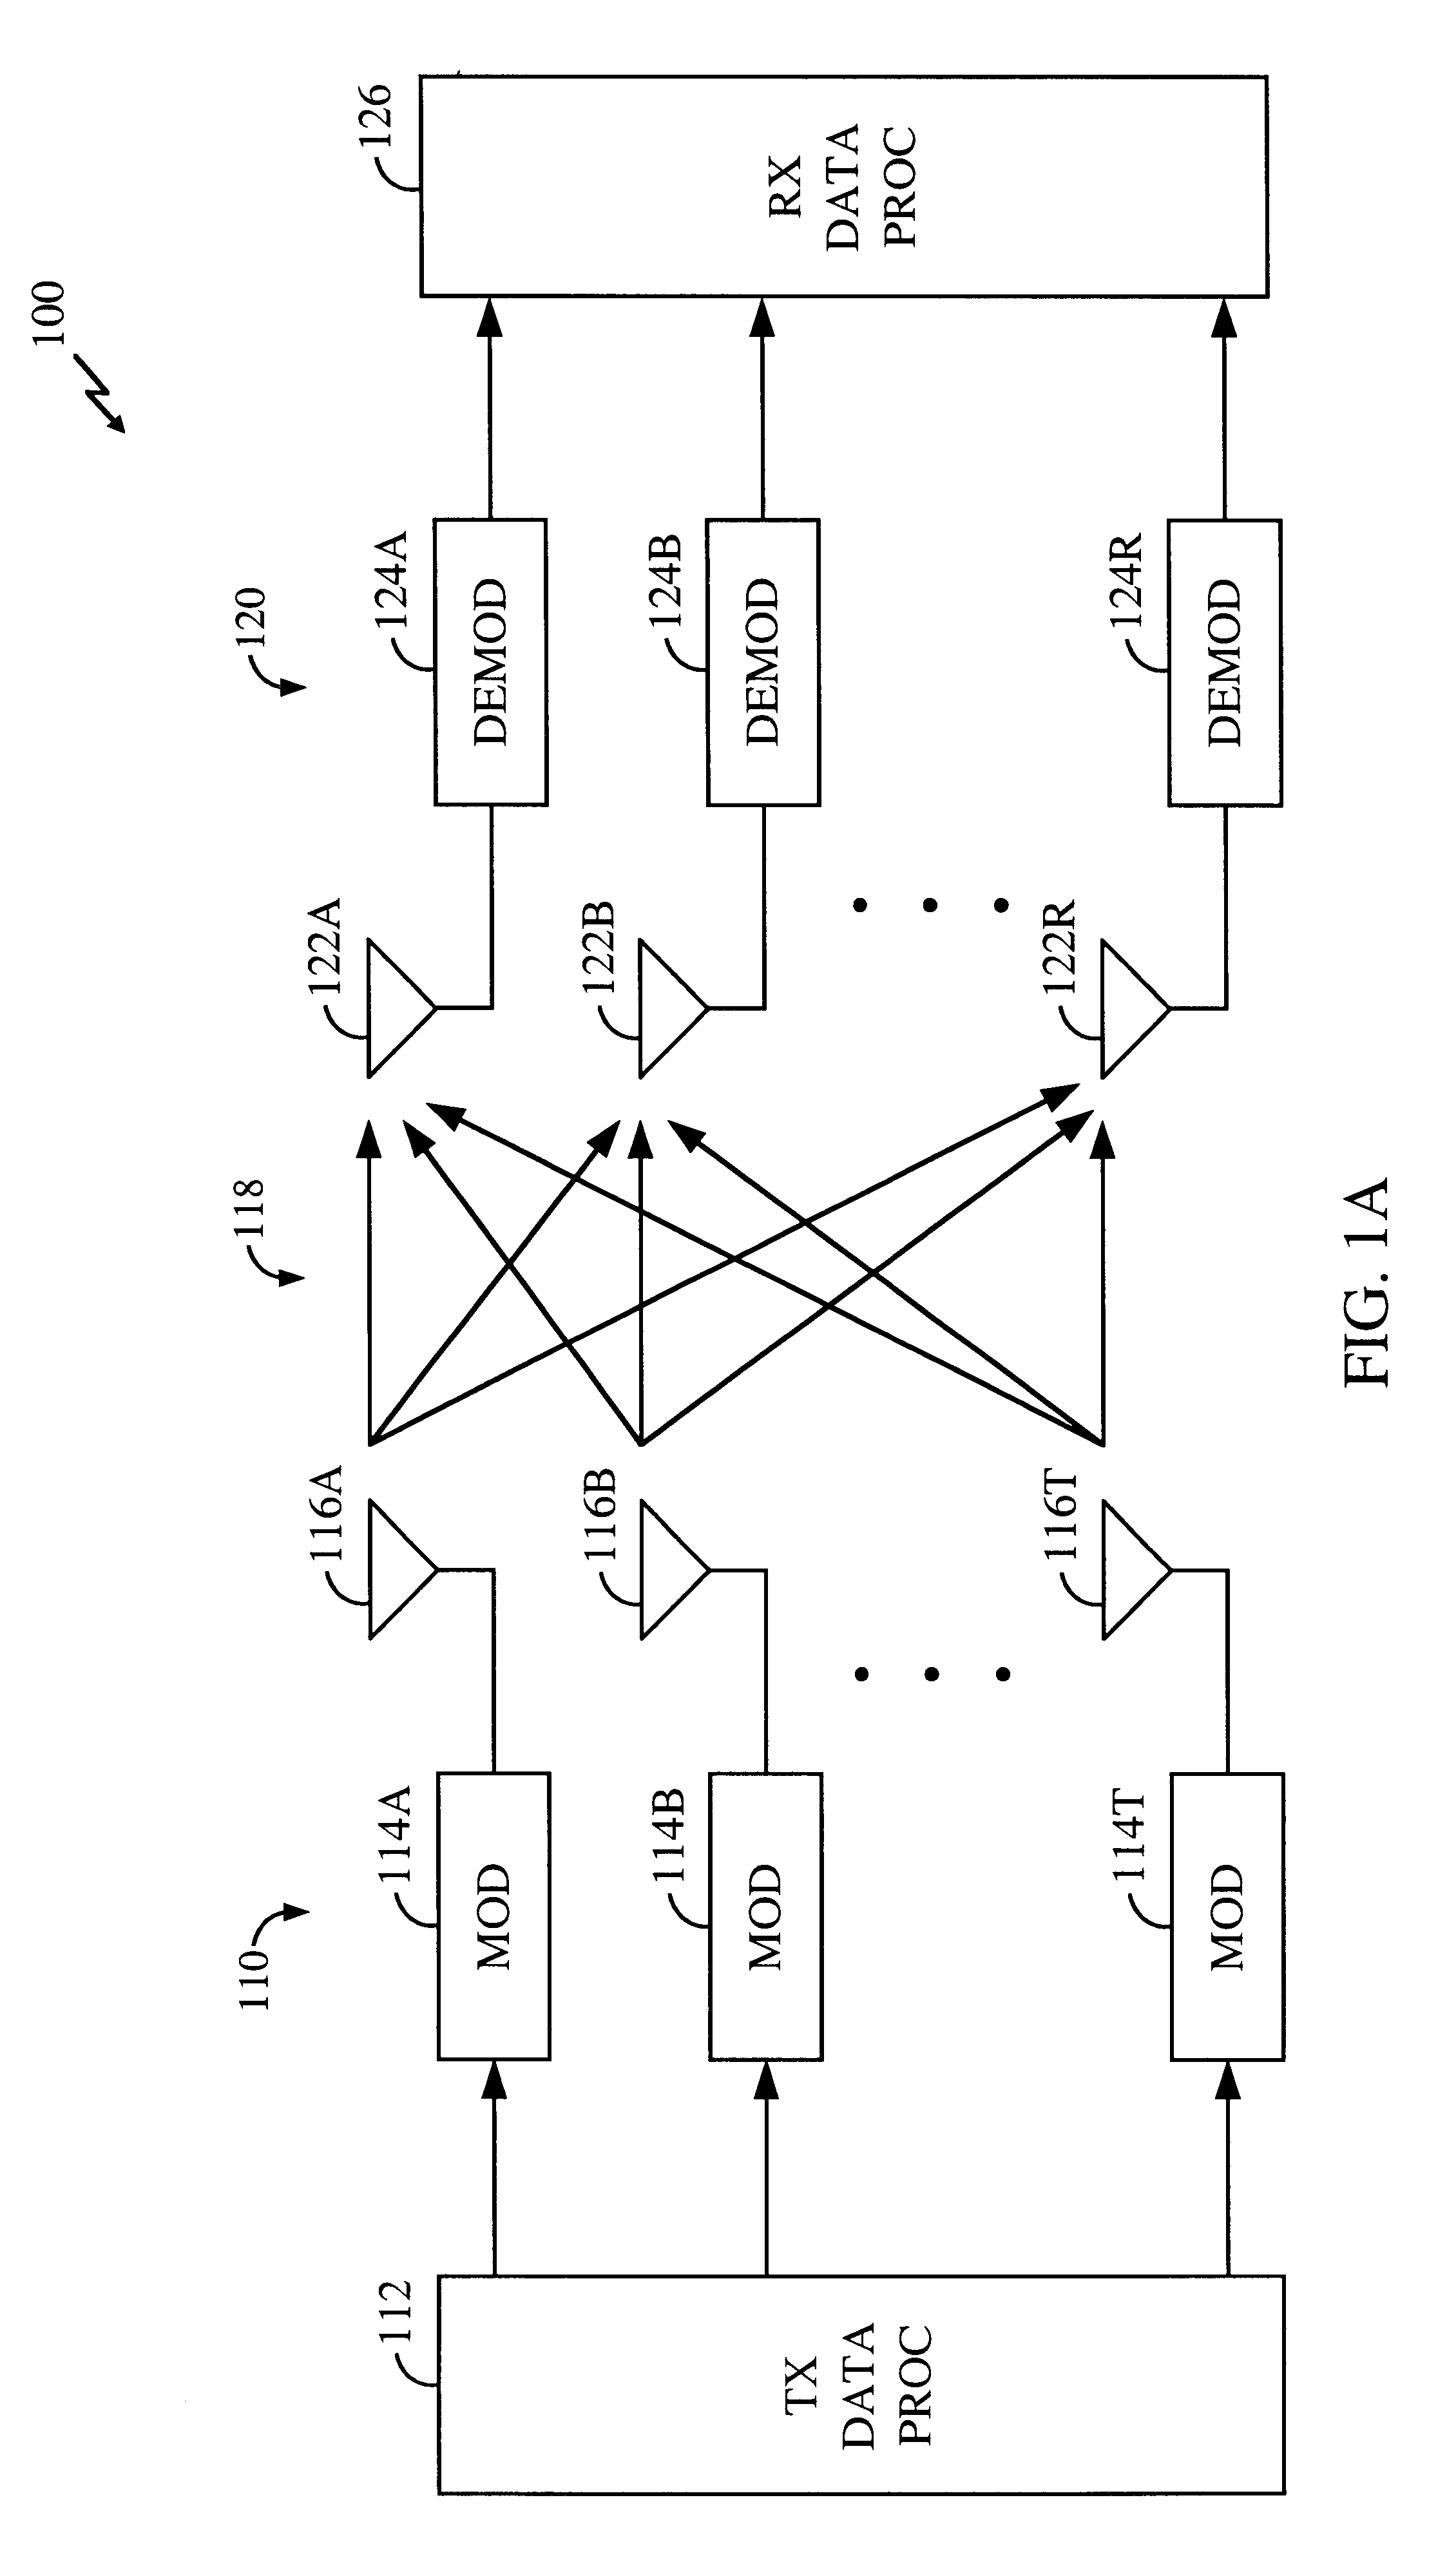 Method and apparatus for measuring reporting channel state information in a high efficiency, high performance communications system